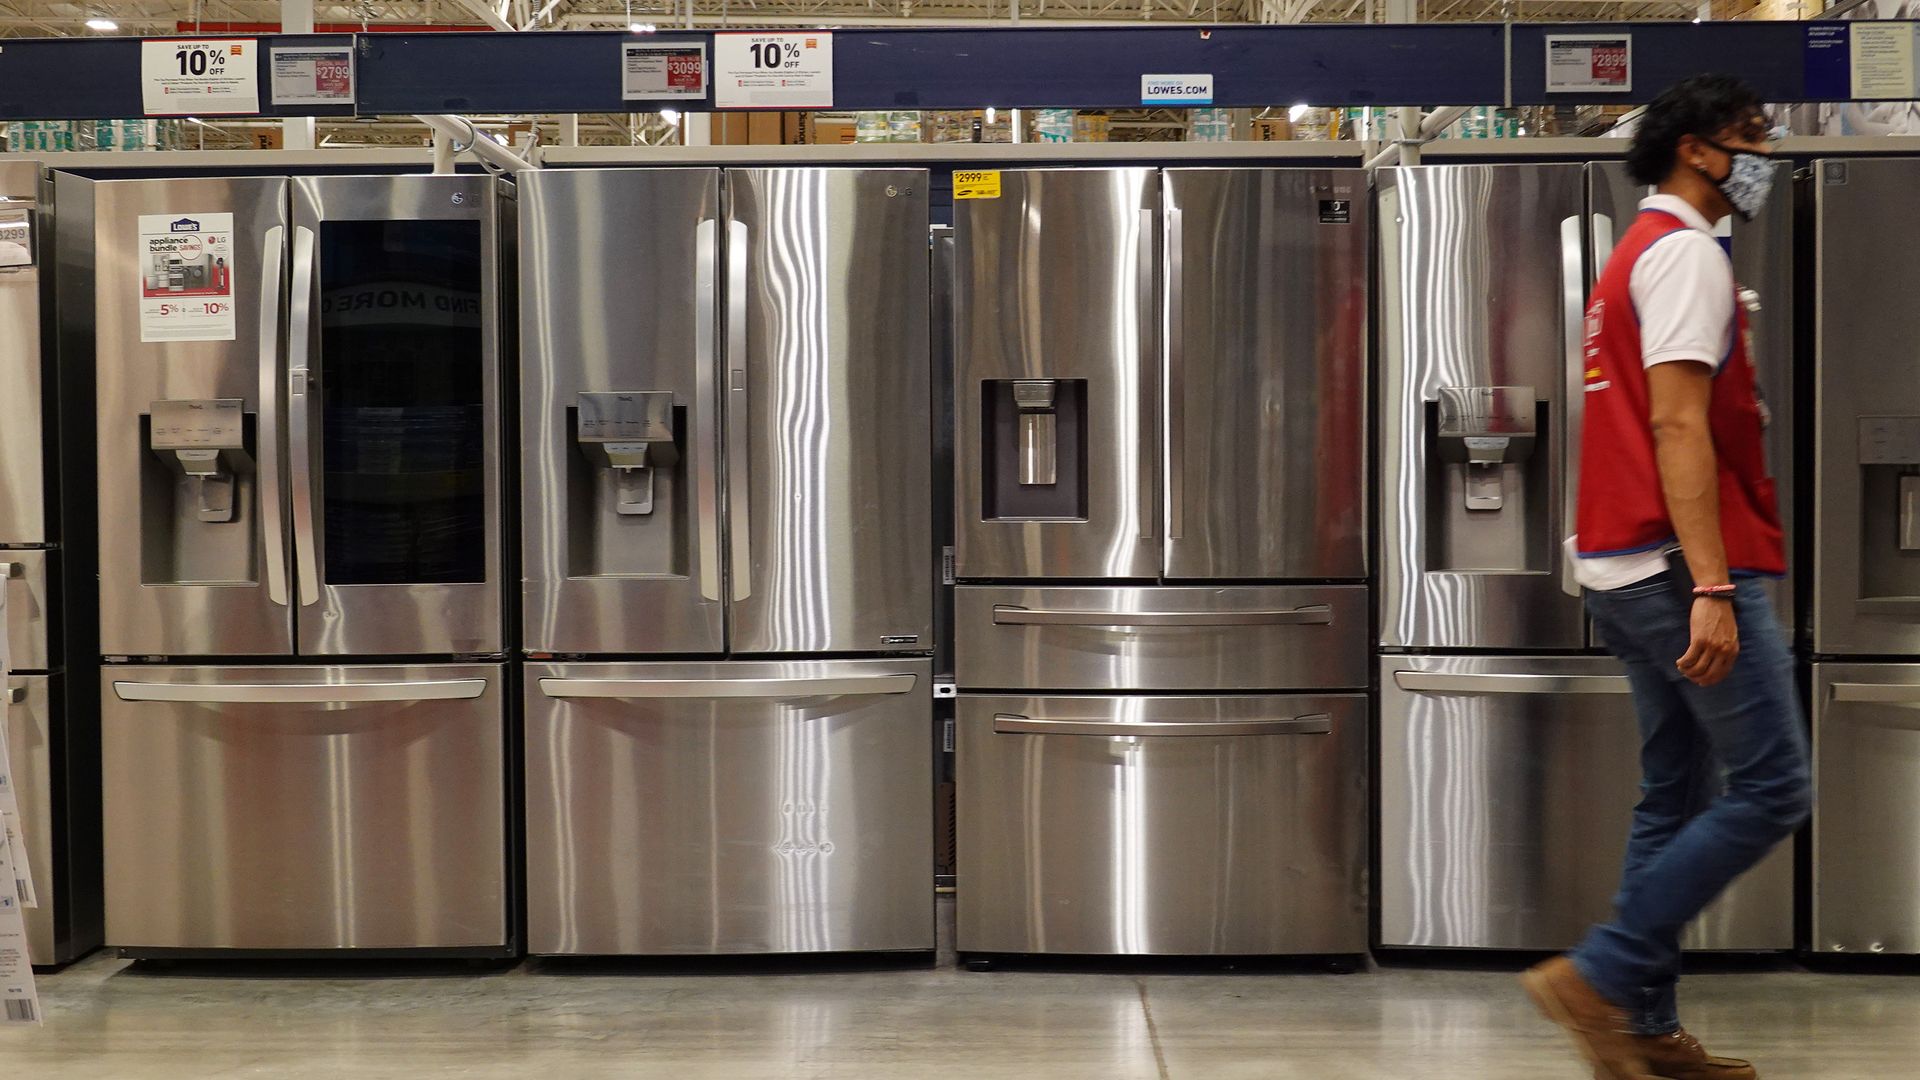 Refrigerators for sale at a Lowe's store